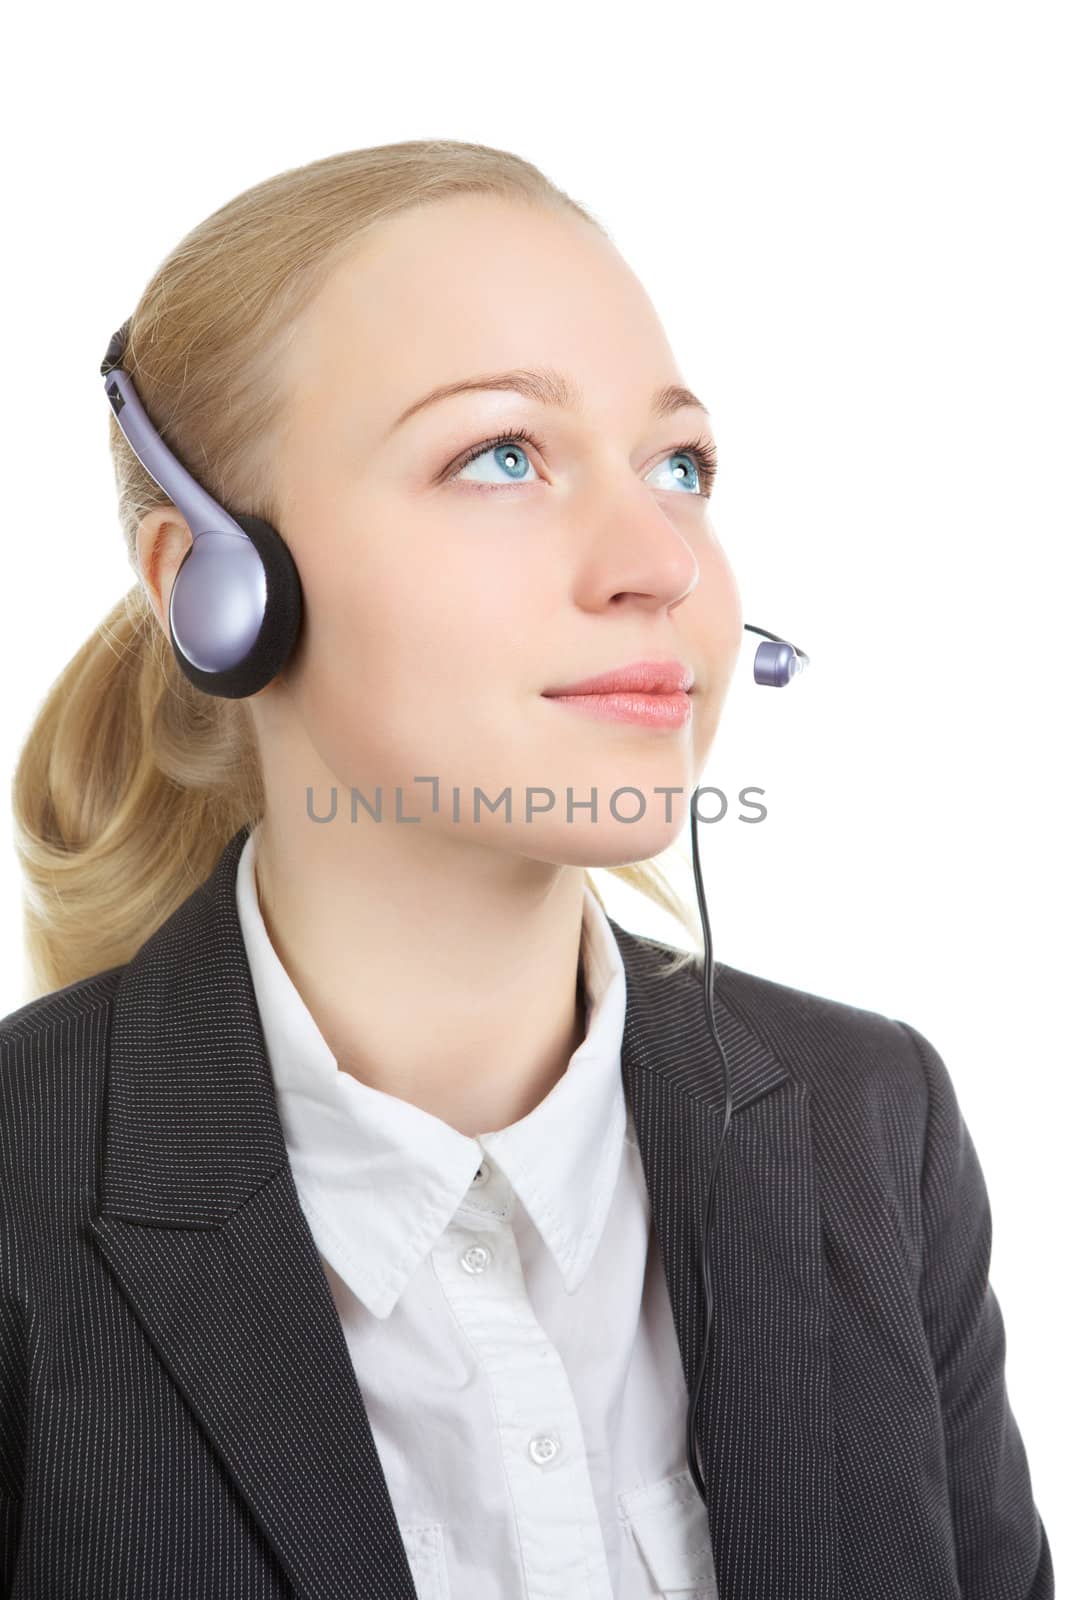 businesswoman talking with clients on headset, isolated on white